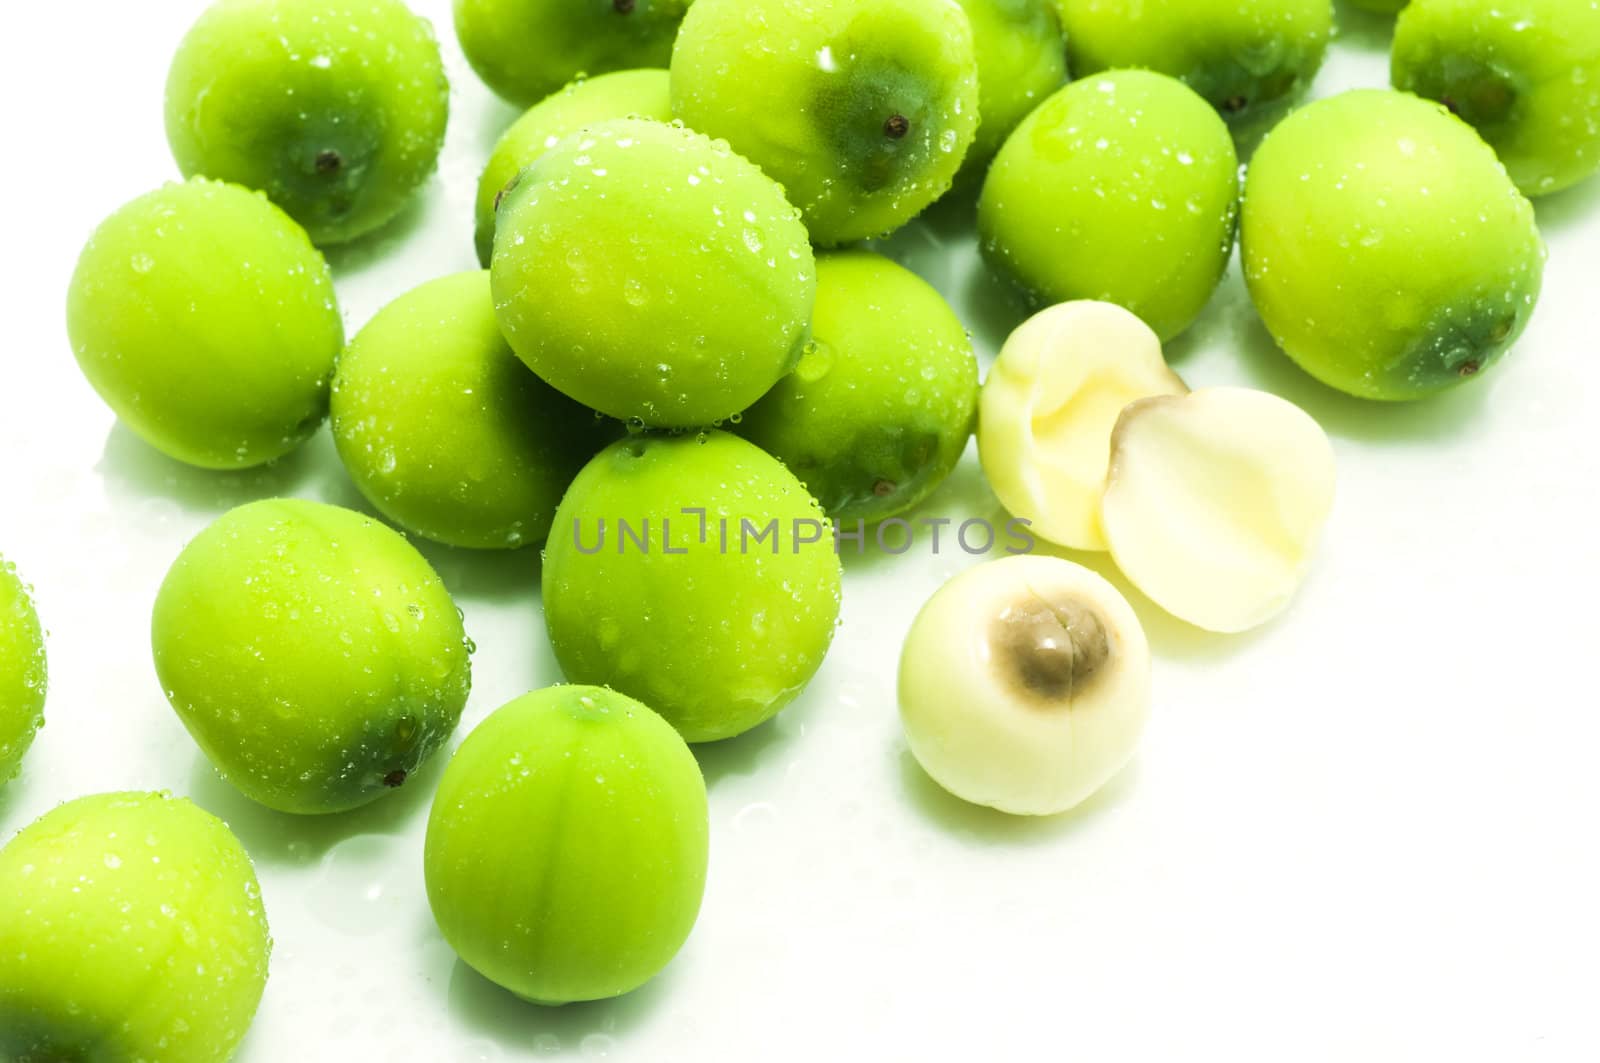  lian zi - The lotus seeds are used extensively in traditional Chinese medicine and desserts.